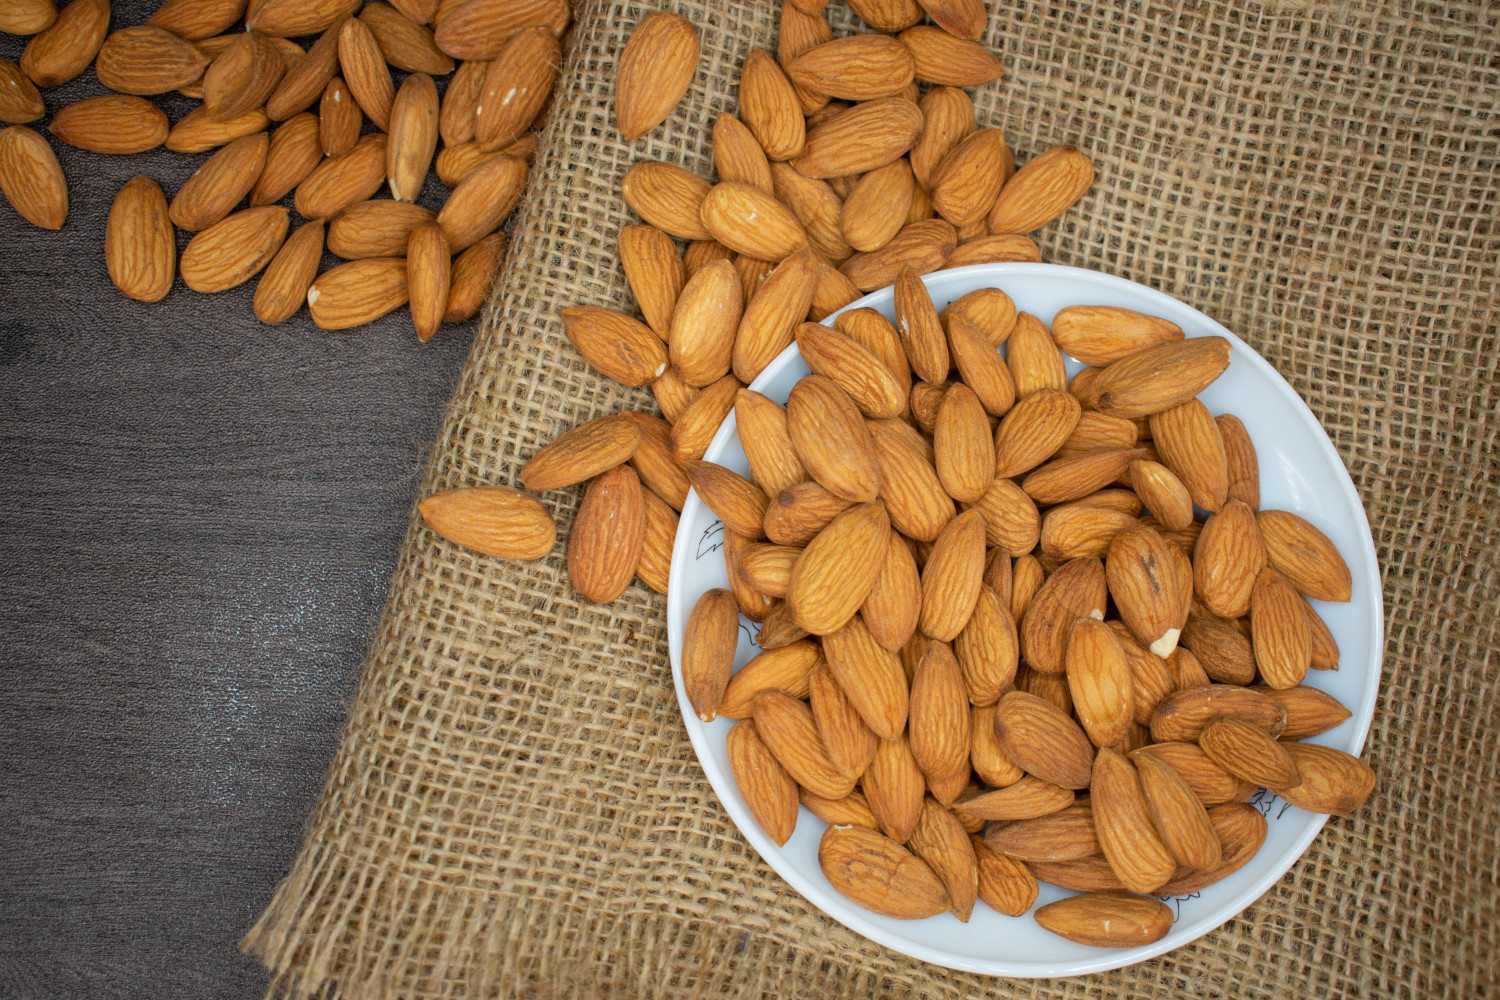 Almonds in a bowl and on the table beside it - Healthy Food Options for Seniors - Focus Care